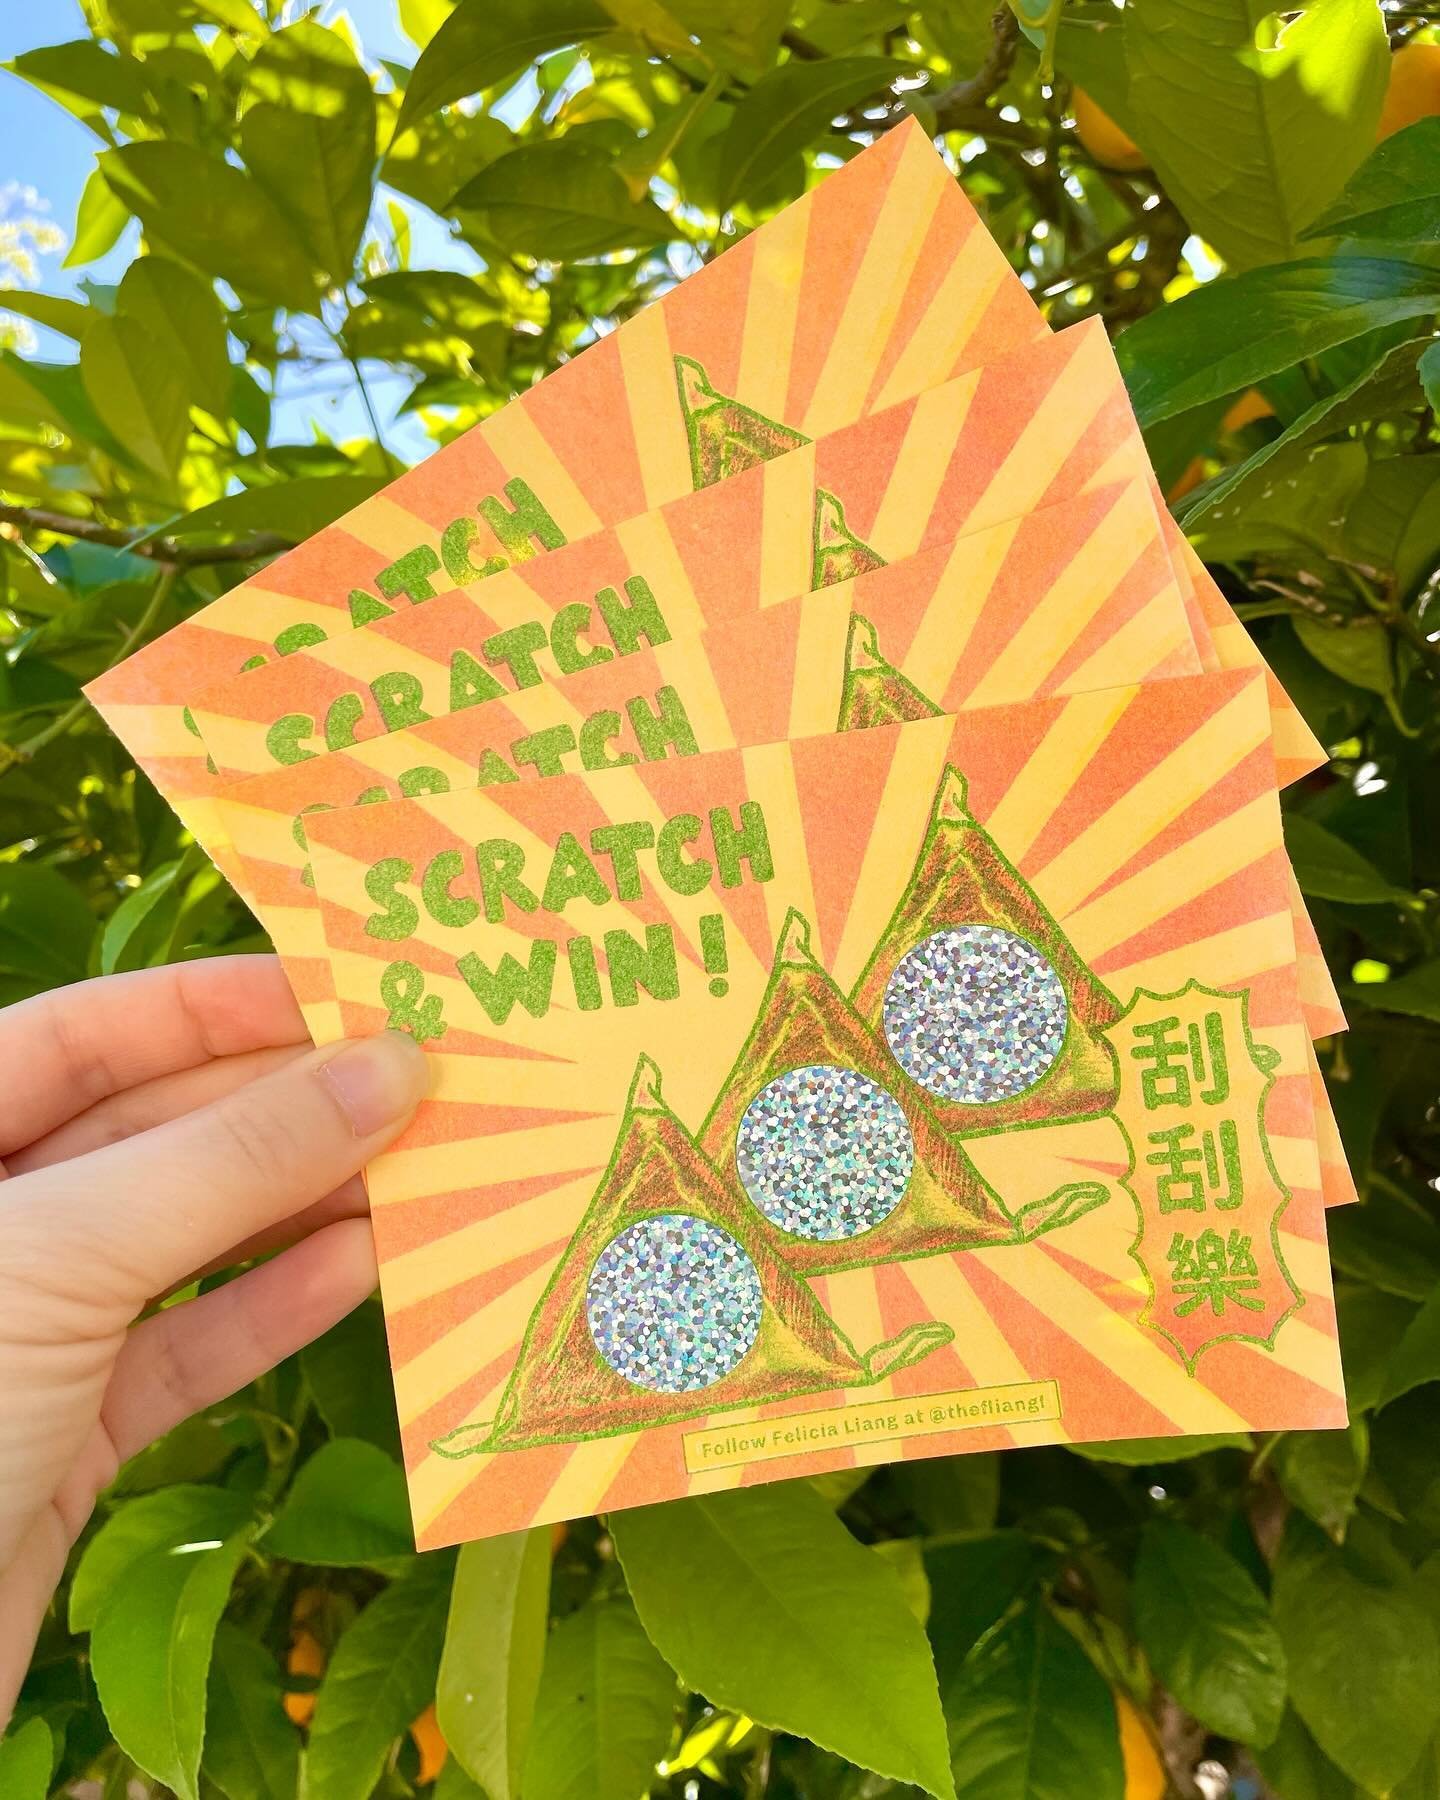 Dropping these onigiri lottery scratch cards today at @tafestival! Spend $40 and get a chance to win more art, including the Taiwan Mega Print Package, which includes all my Taiwanese prints!

These scratch cards are massive in Taiwan, especially aro